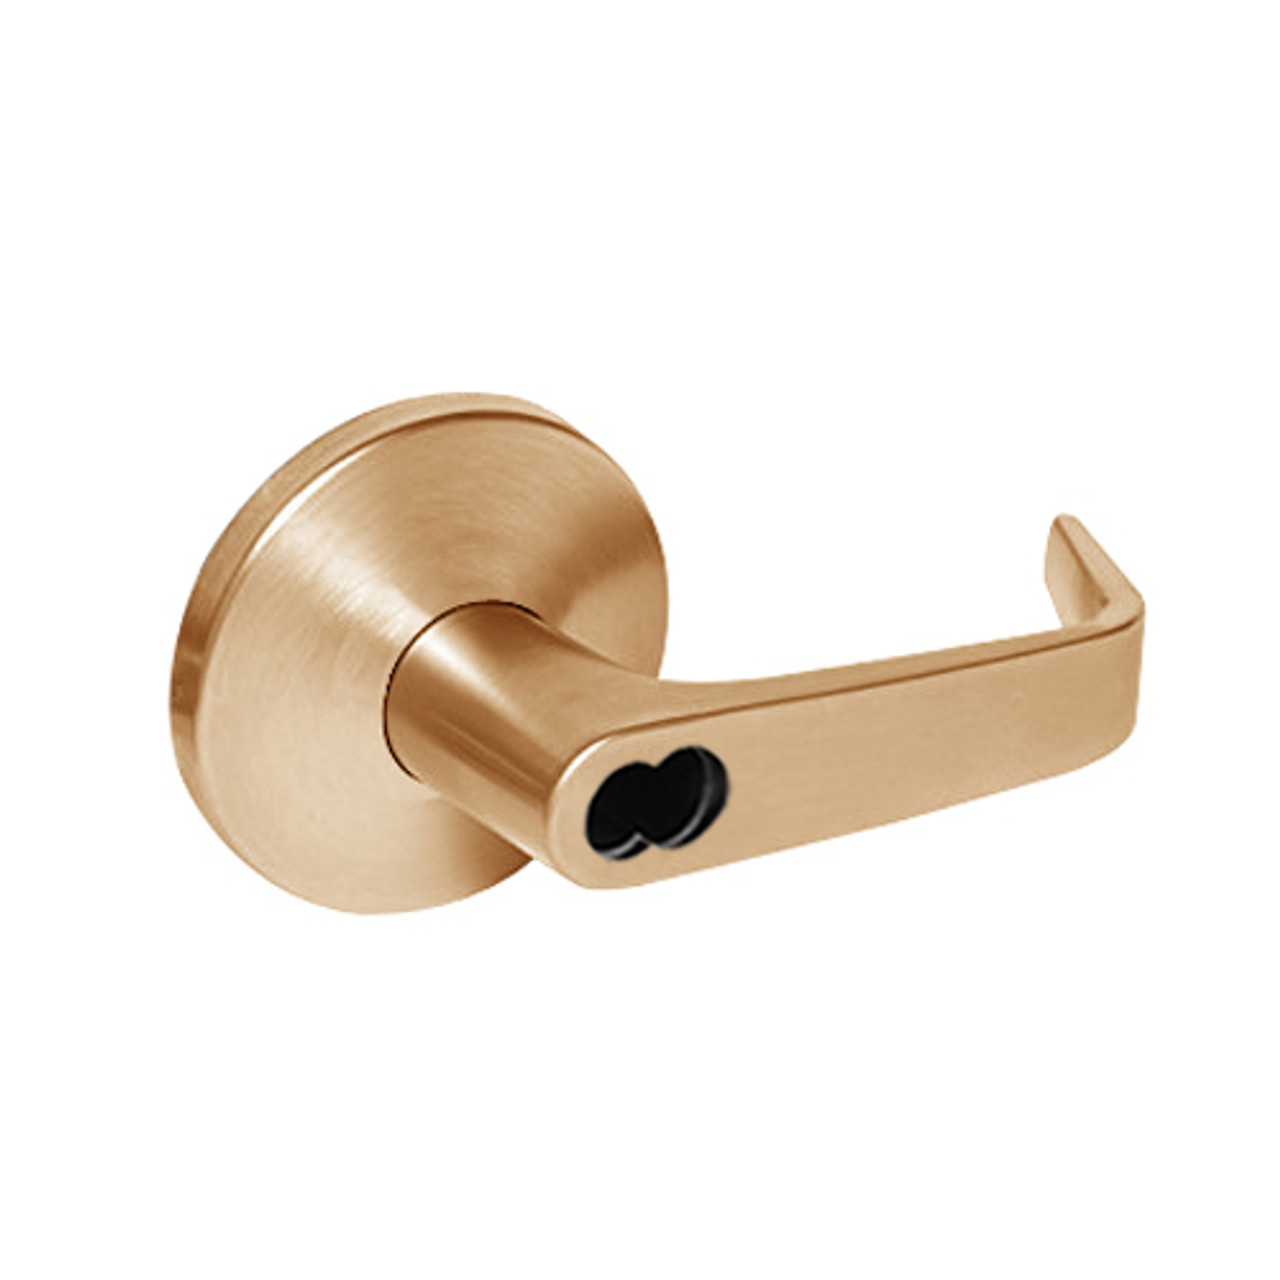 9K37XR15LS3612 Best 9K Series Special Function Cylindrical Lever Locks with Contour Angle with Return Lever Design Accept 7 Pin Best Core in Satin Bronze